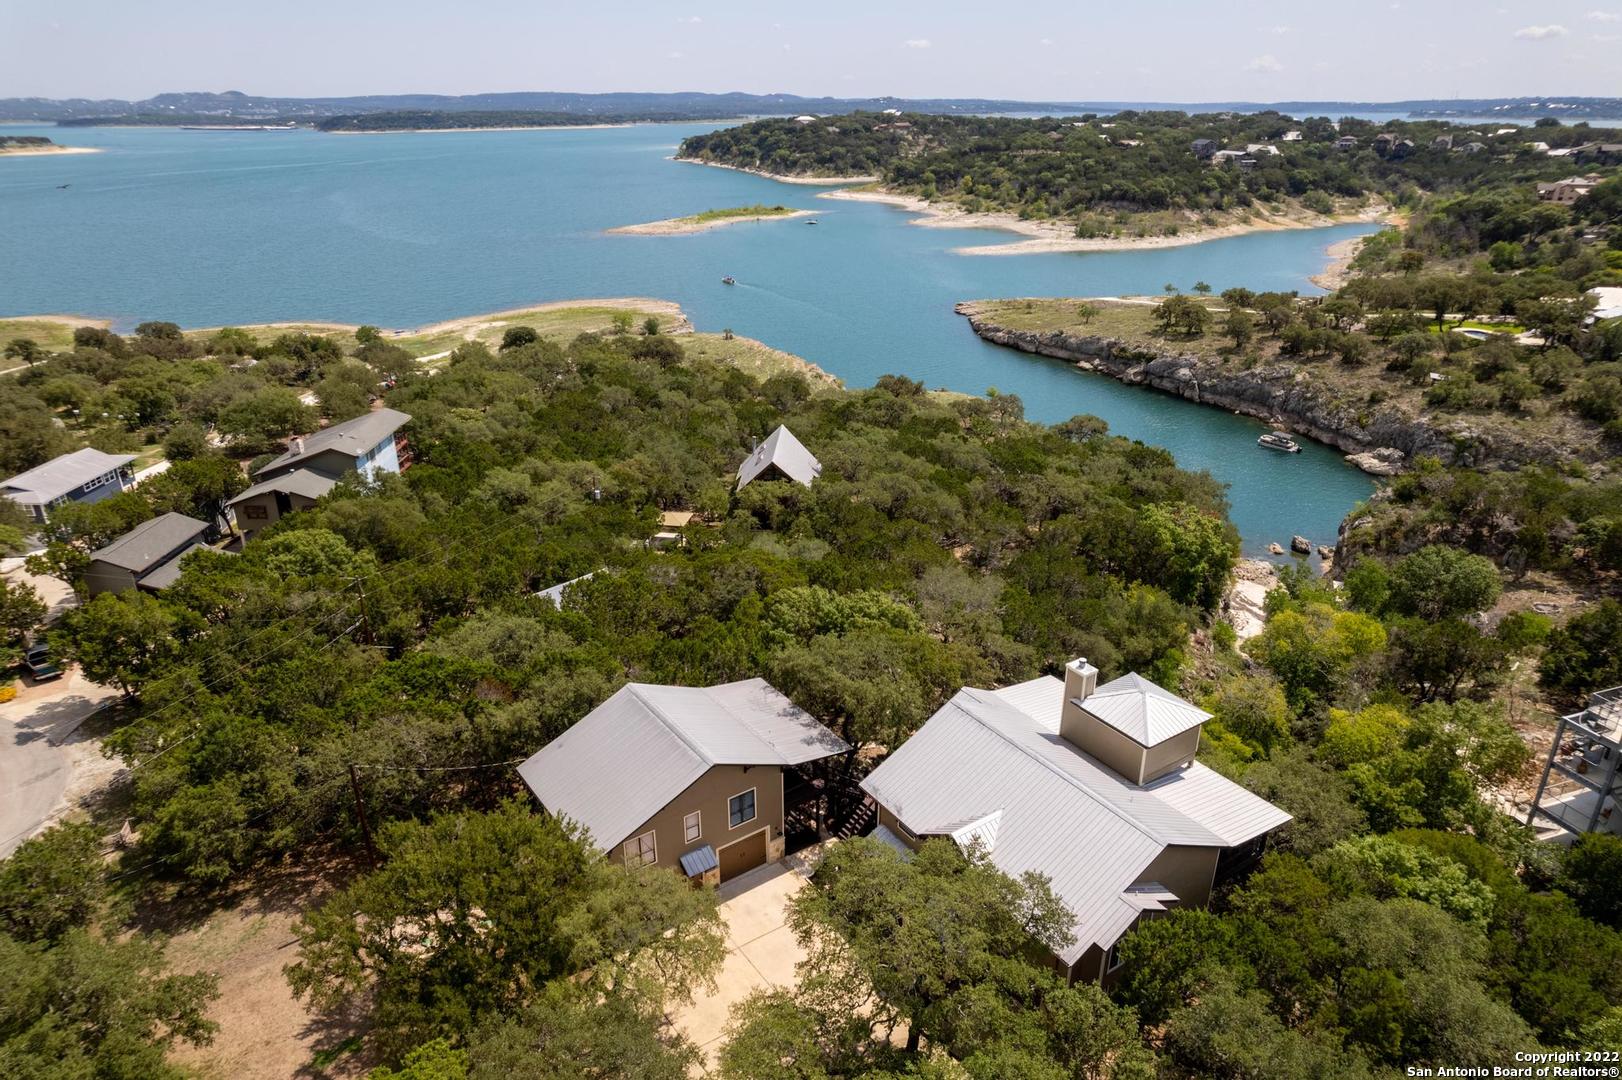 LUXURY WATERFRONT HOME & WATER ACCESS! Treehouse atmosphere above one of the most beautiful cliff coves on Canyon Lake.   Well appointed custom home and guest house for entertaining long term guests, or your own solitude and wellness. Multiple decks for relaxation and privacy.  3 car garage.  Unplug, unwind in all the best nature has to offer! Check out the virtual tour and the aerial views! AGENT OPEN.